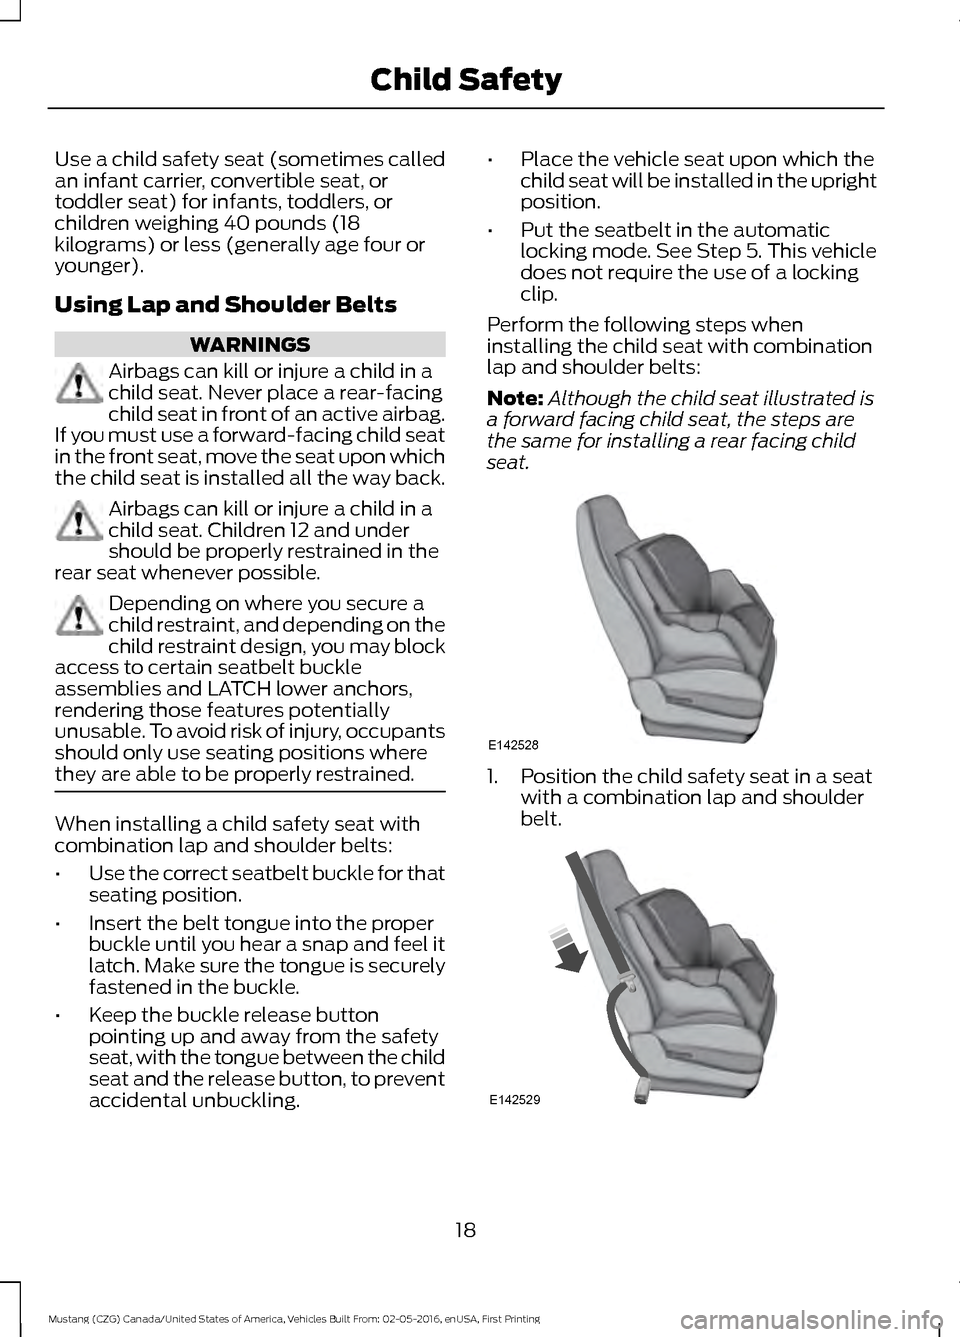 FORD MUSTANG 2017 6.G Owners Manual Use a child safety seat (sometimes called
an infant carrier, convertible seat, or
toddler seat) for infants, toddlers, or
children weighing 40 pounds (18
kilograms) or less (generally age four or
youn